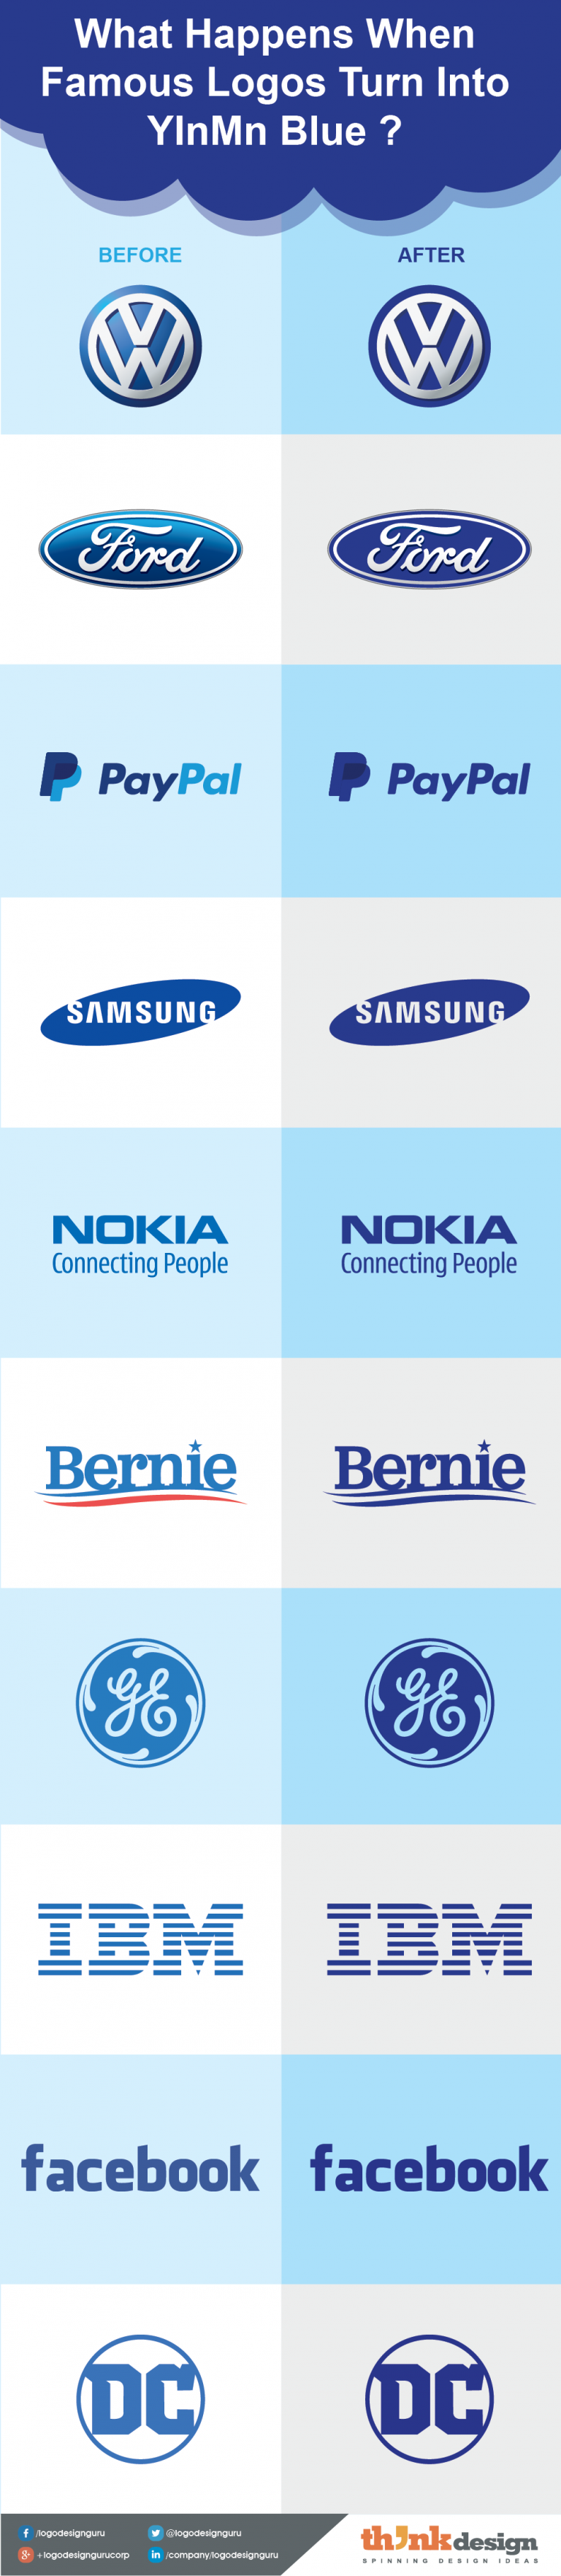 YInMn Blue Change The Meaning Of Popular Logos